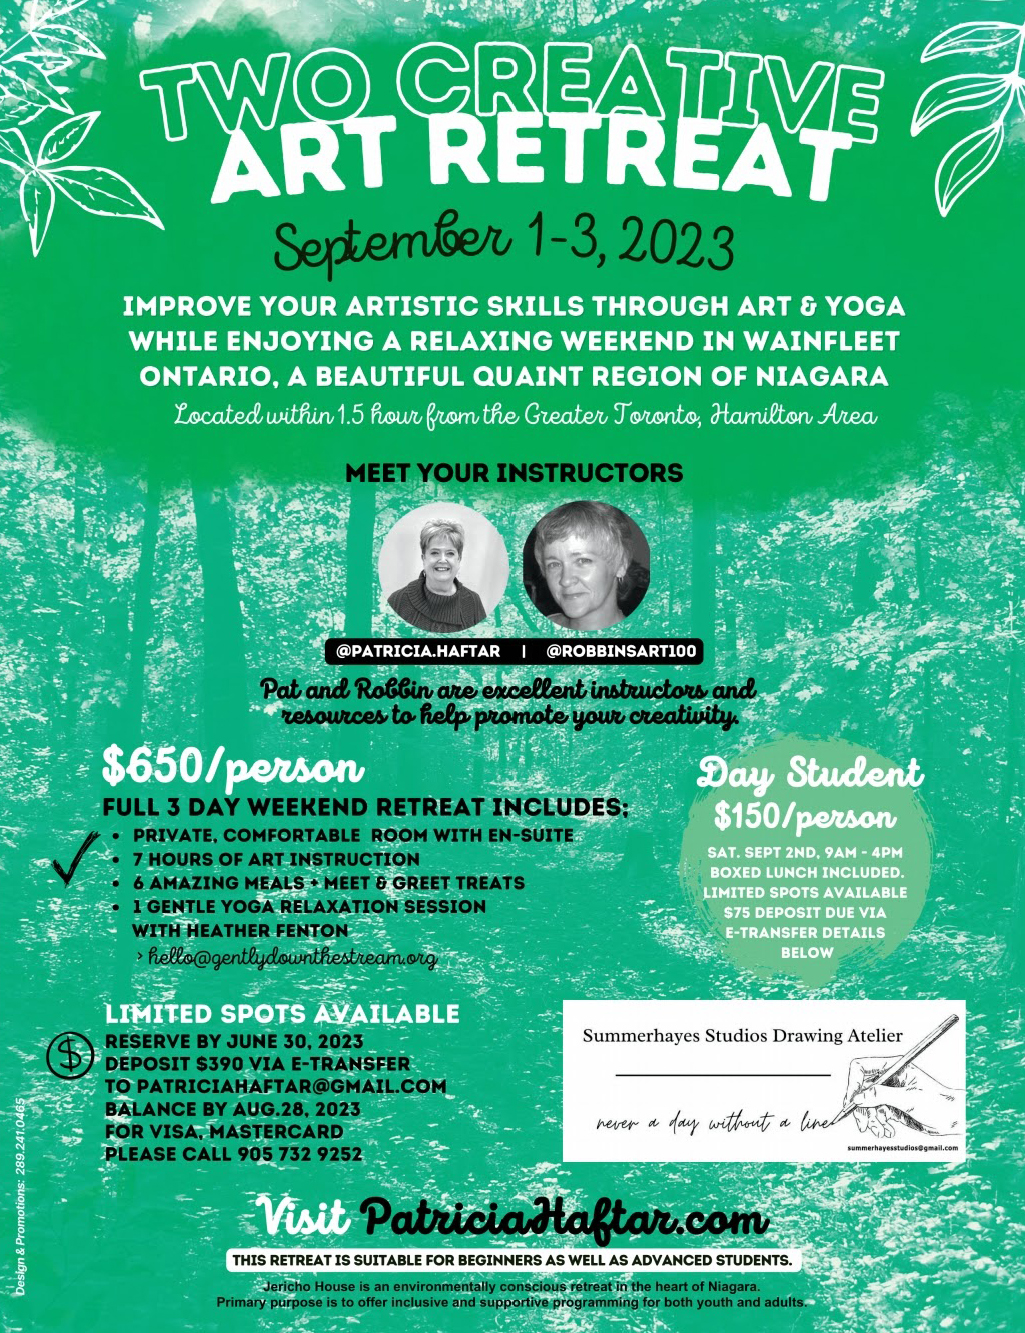 The Art Retreat: What To Expect